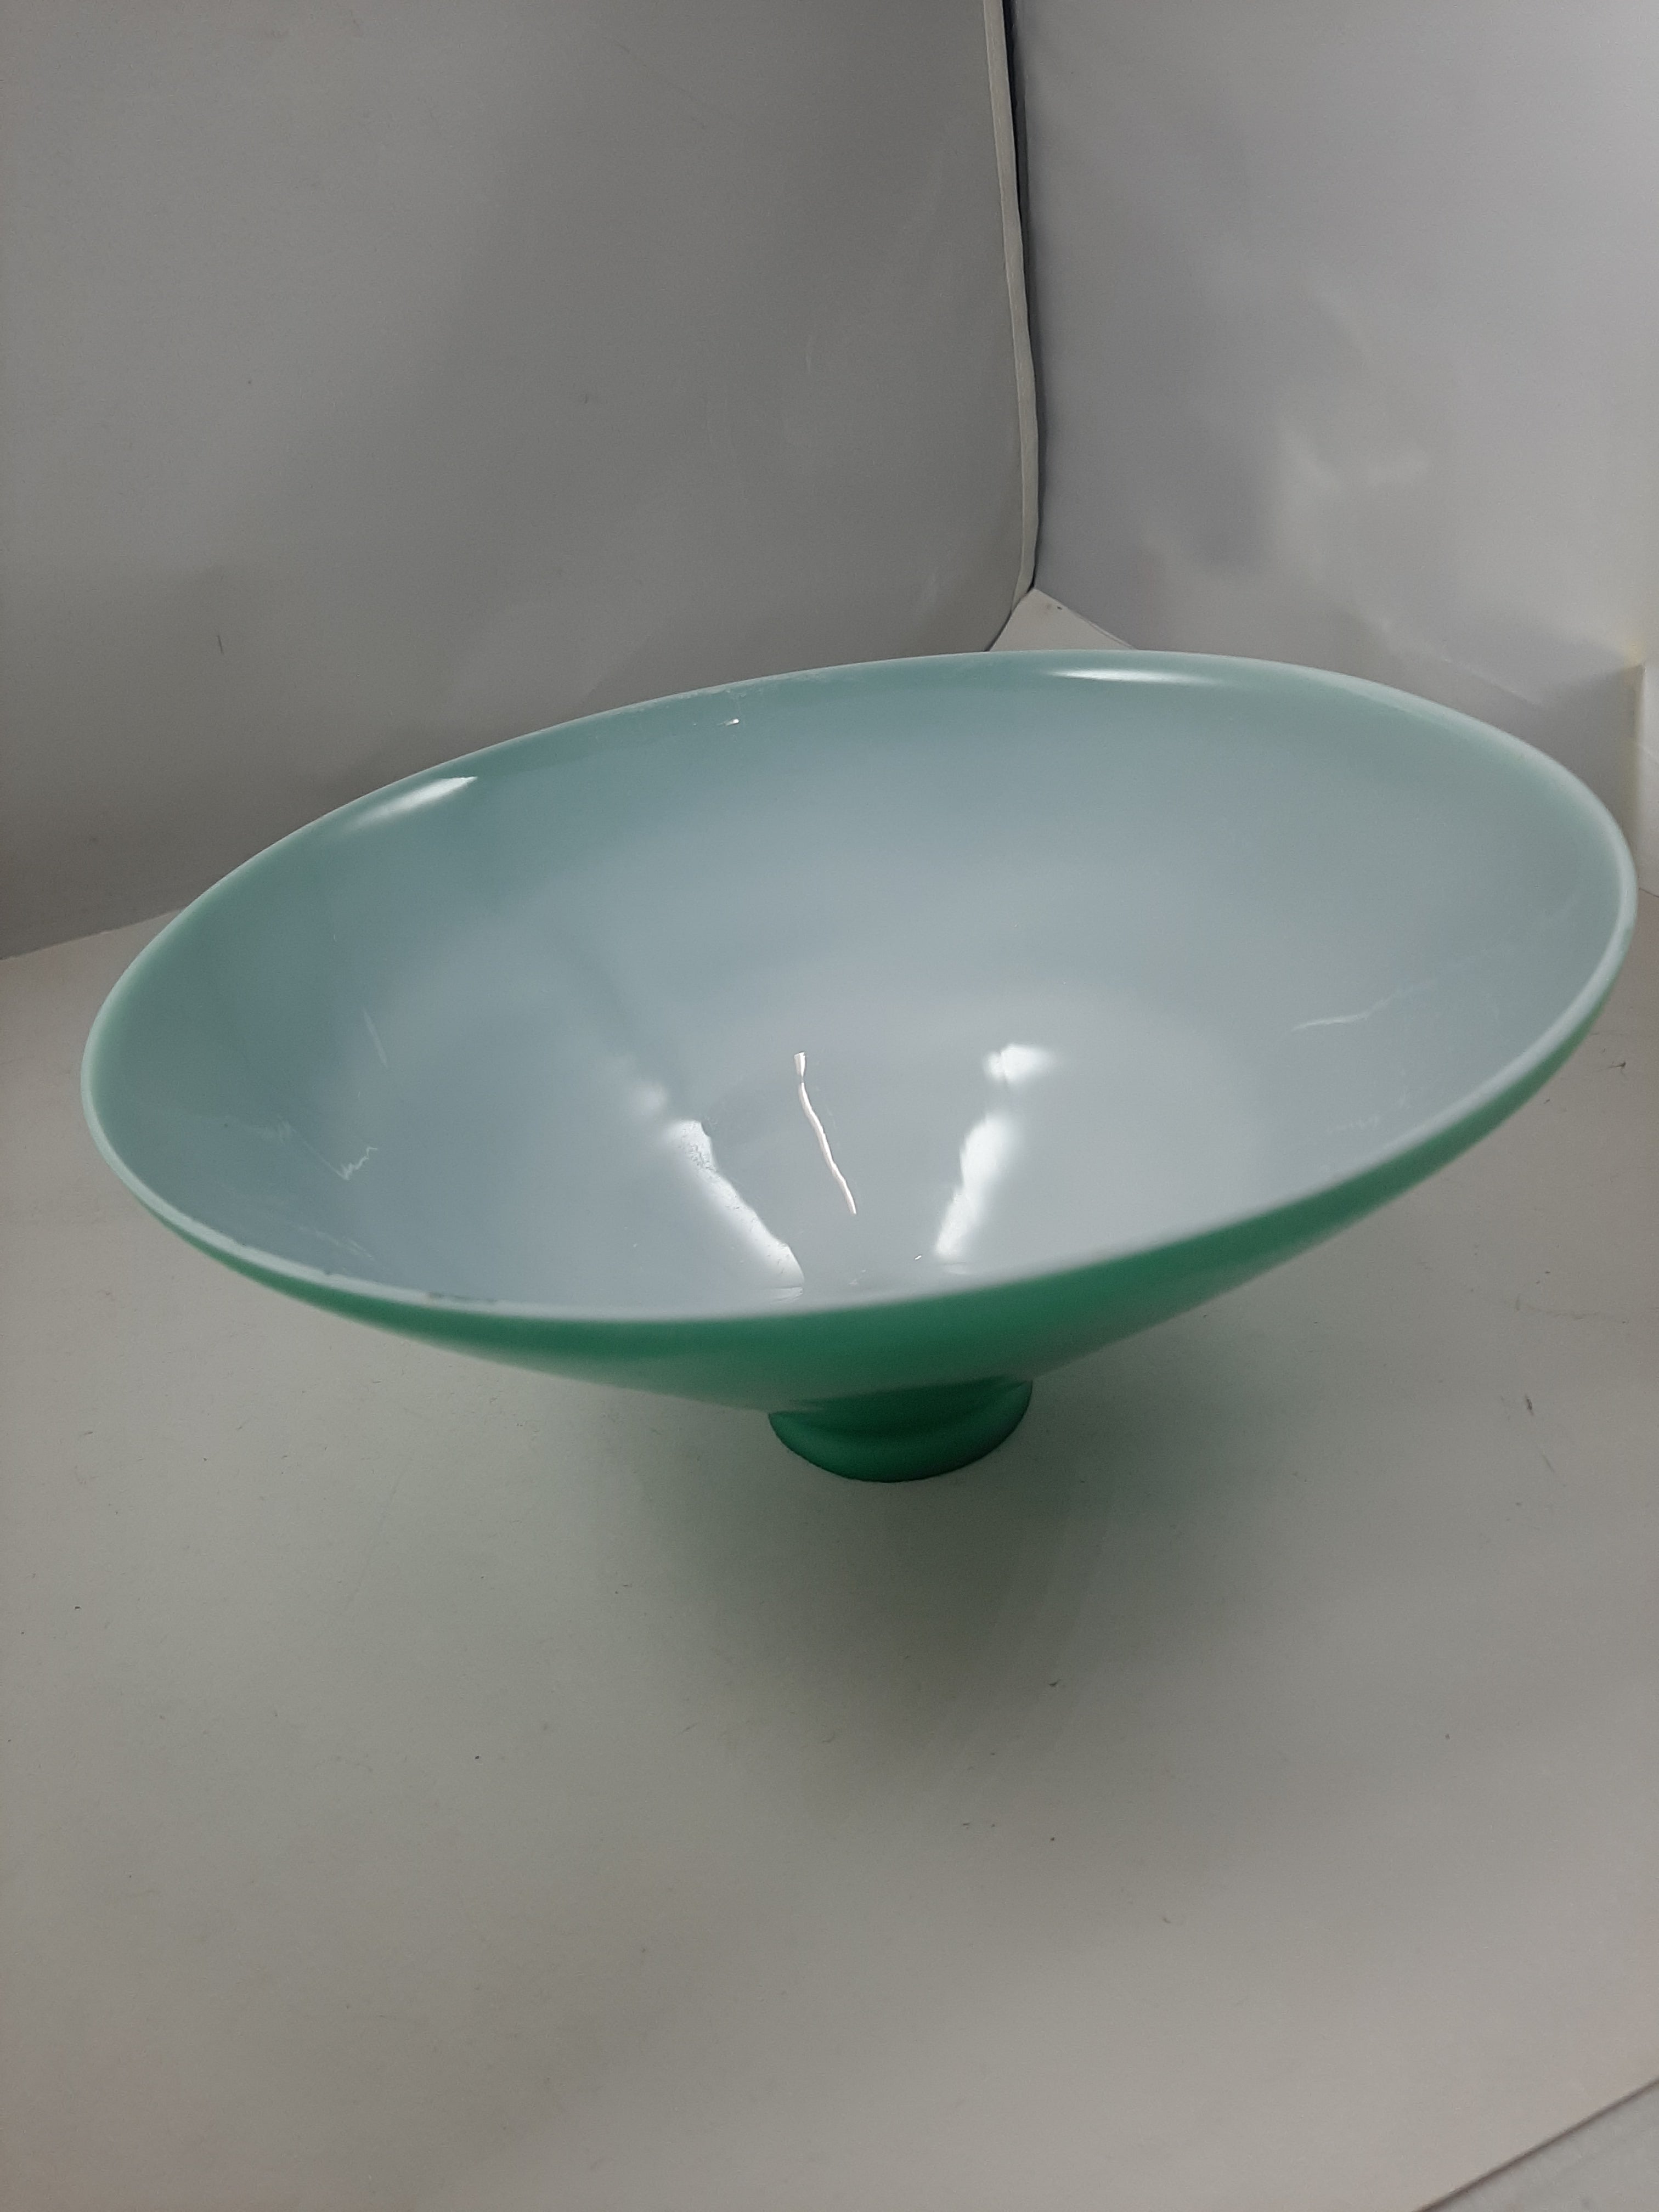 Painted 10" diameter green cone shade with 2-1/4" fitter